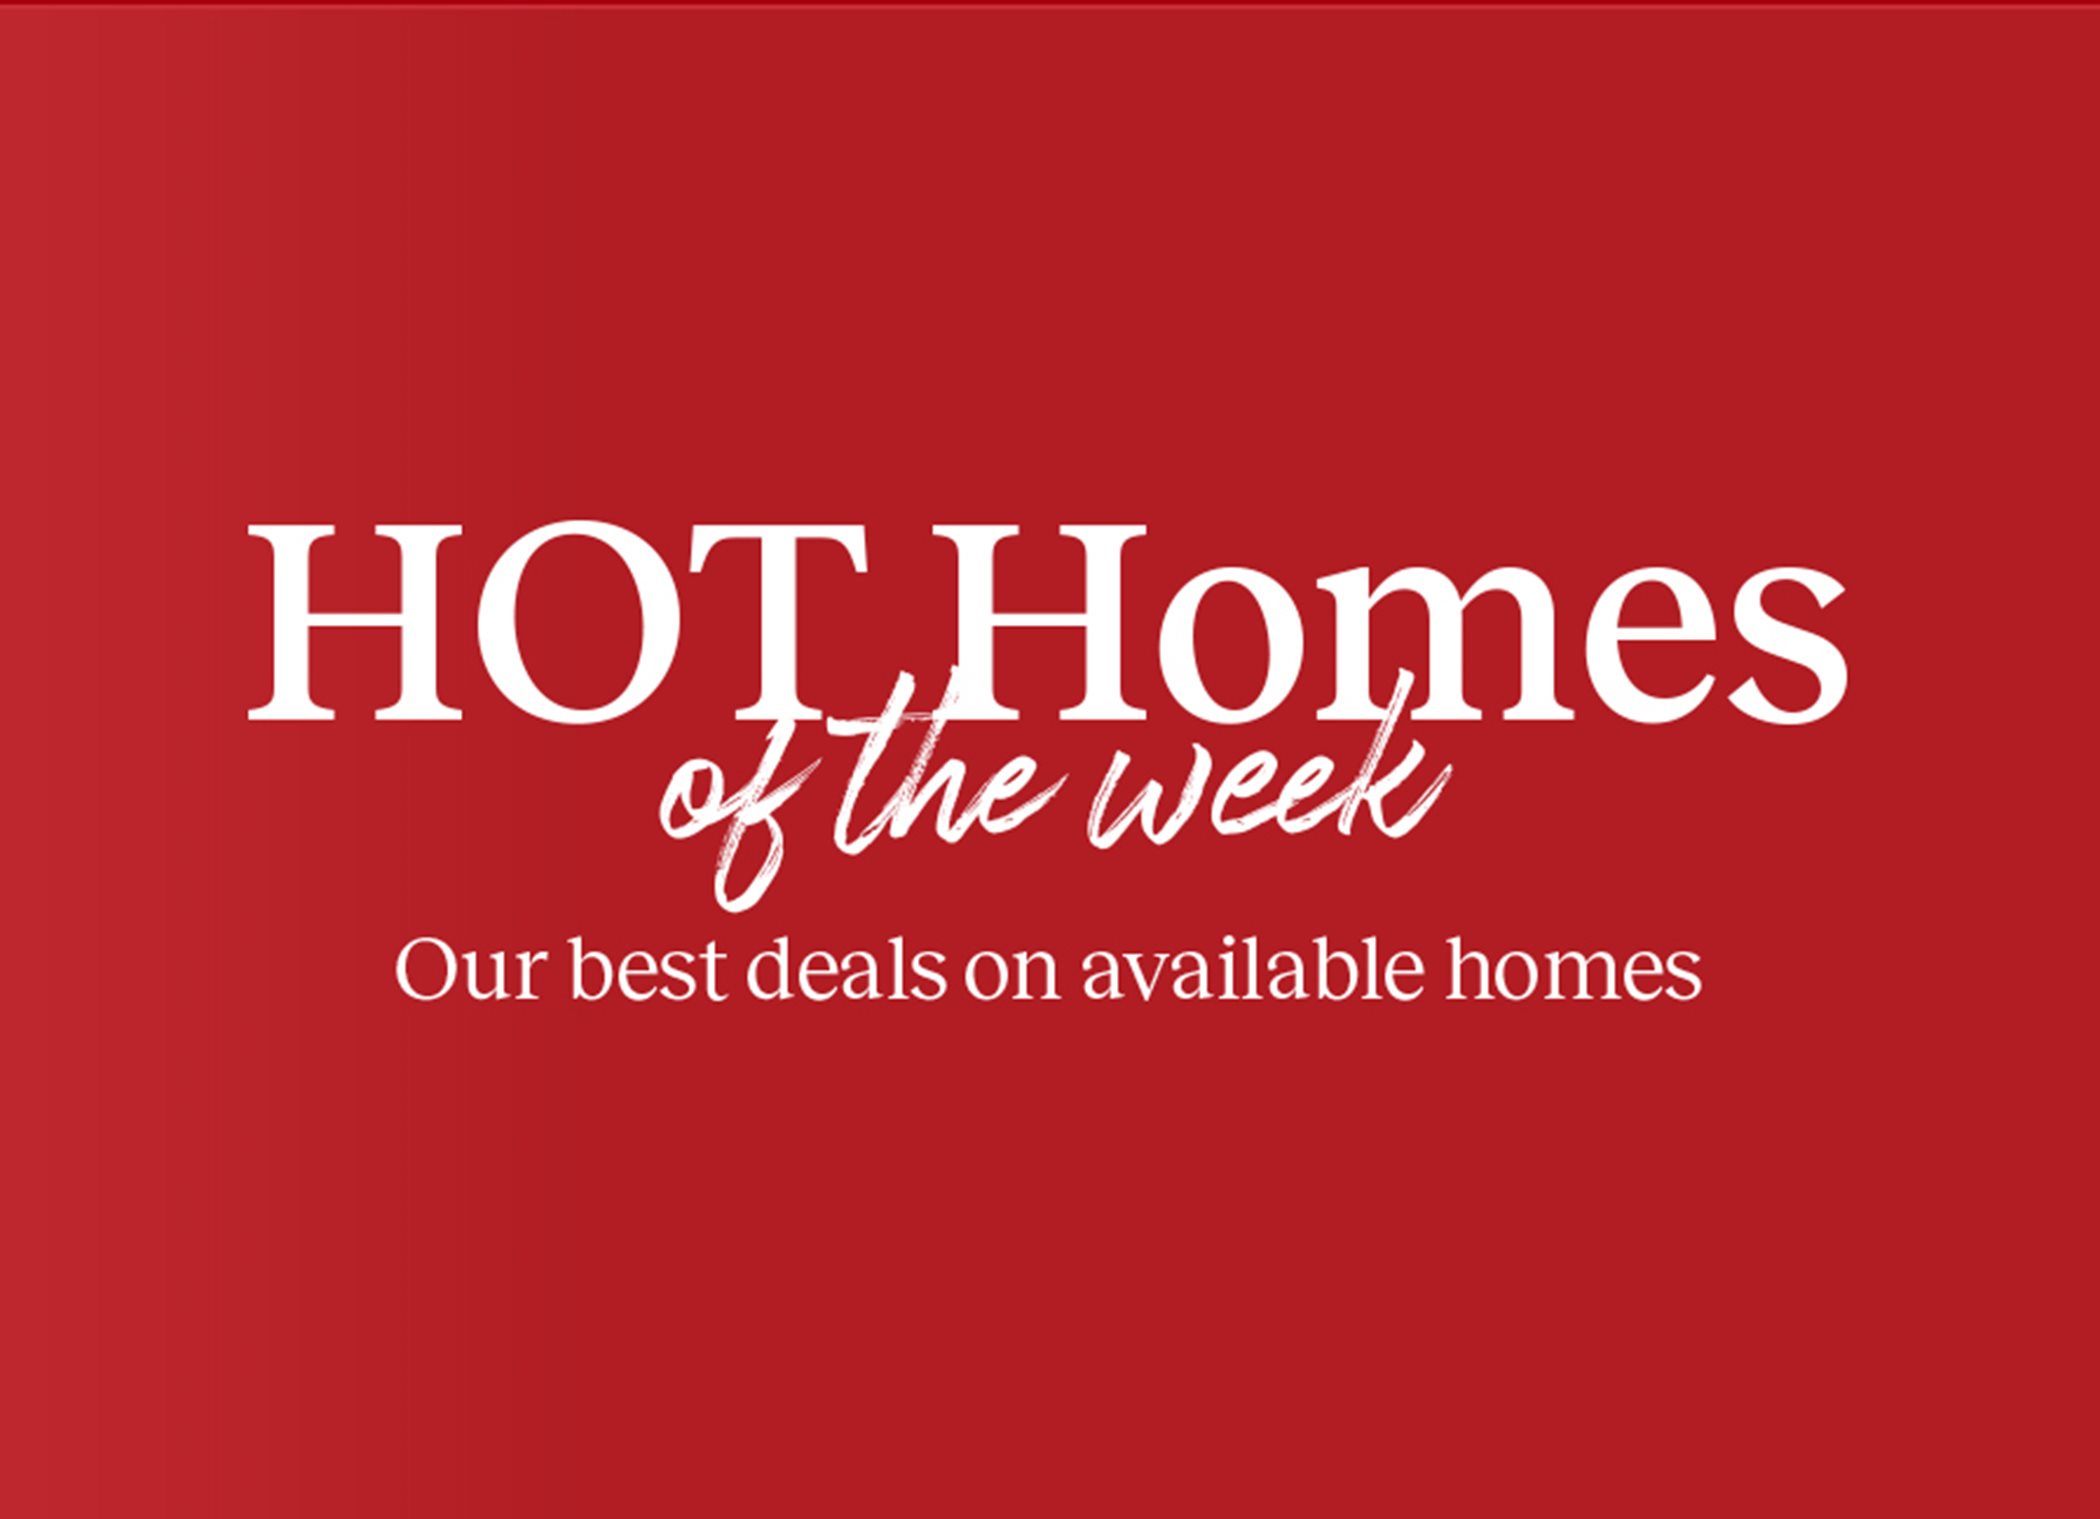 Hot homes of the Week. Our best deals on available homes